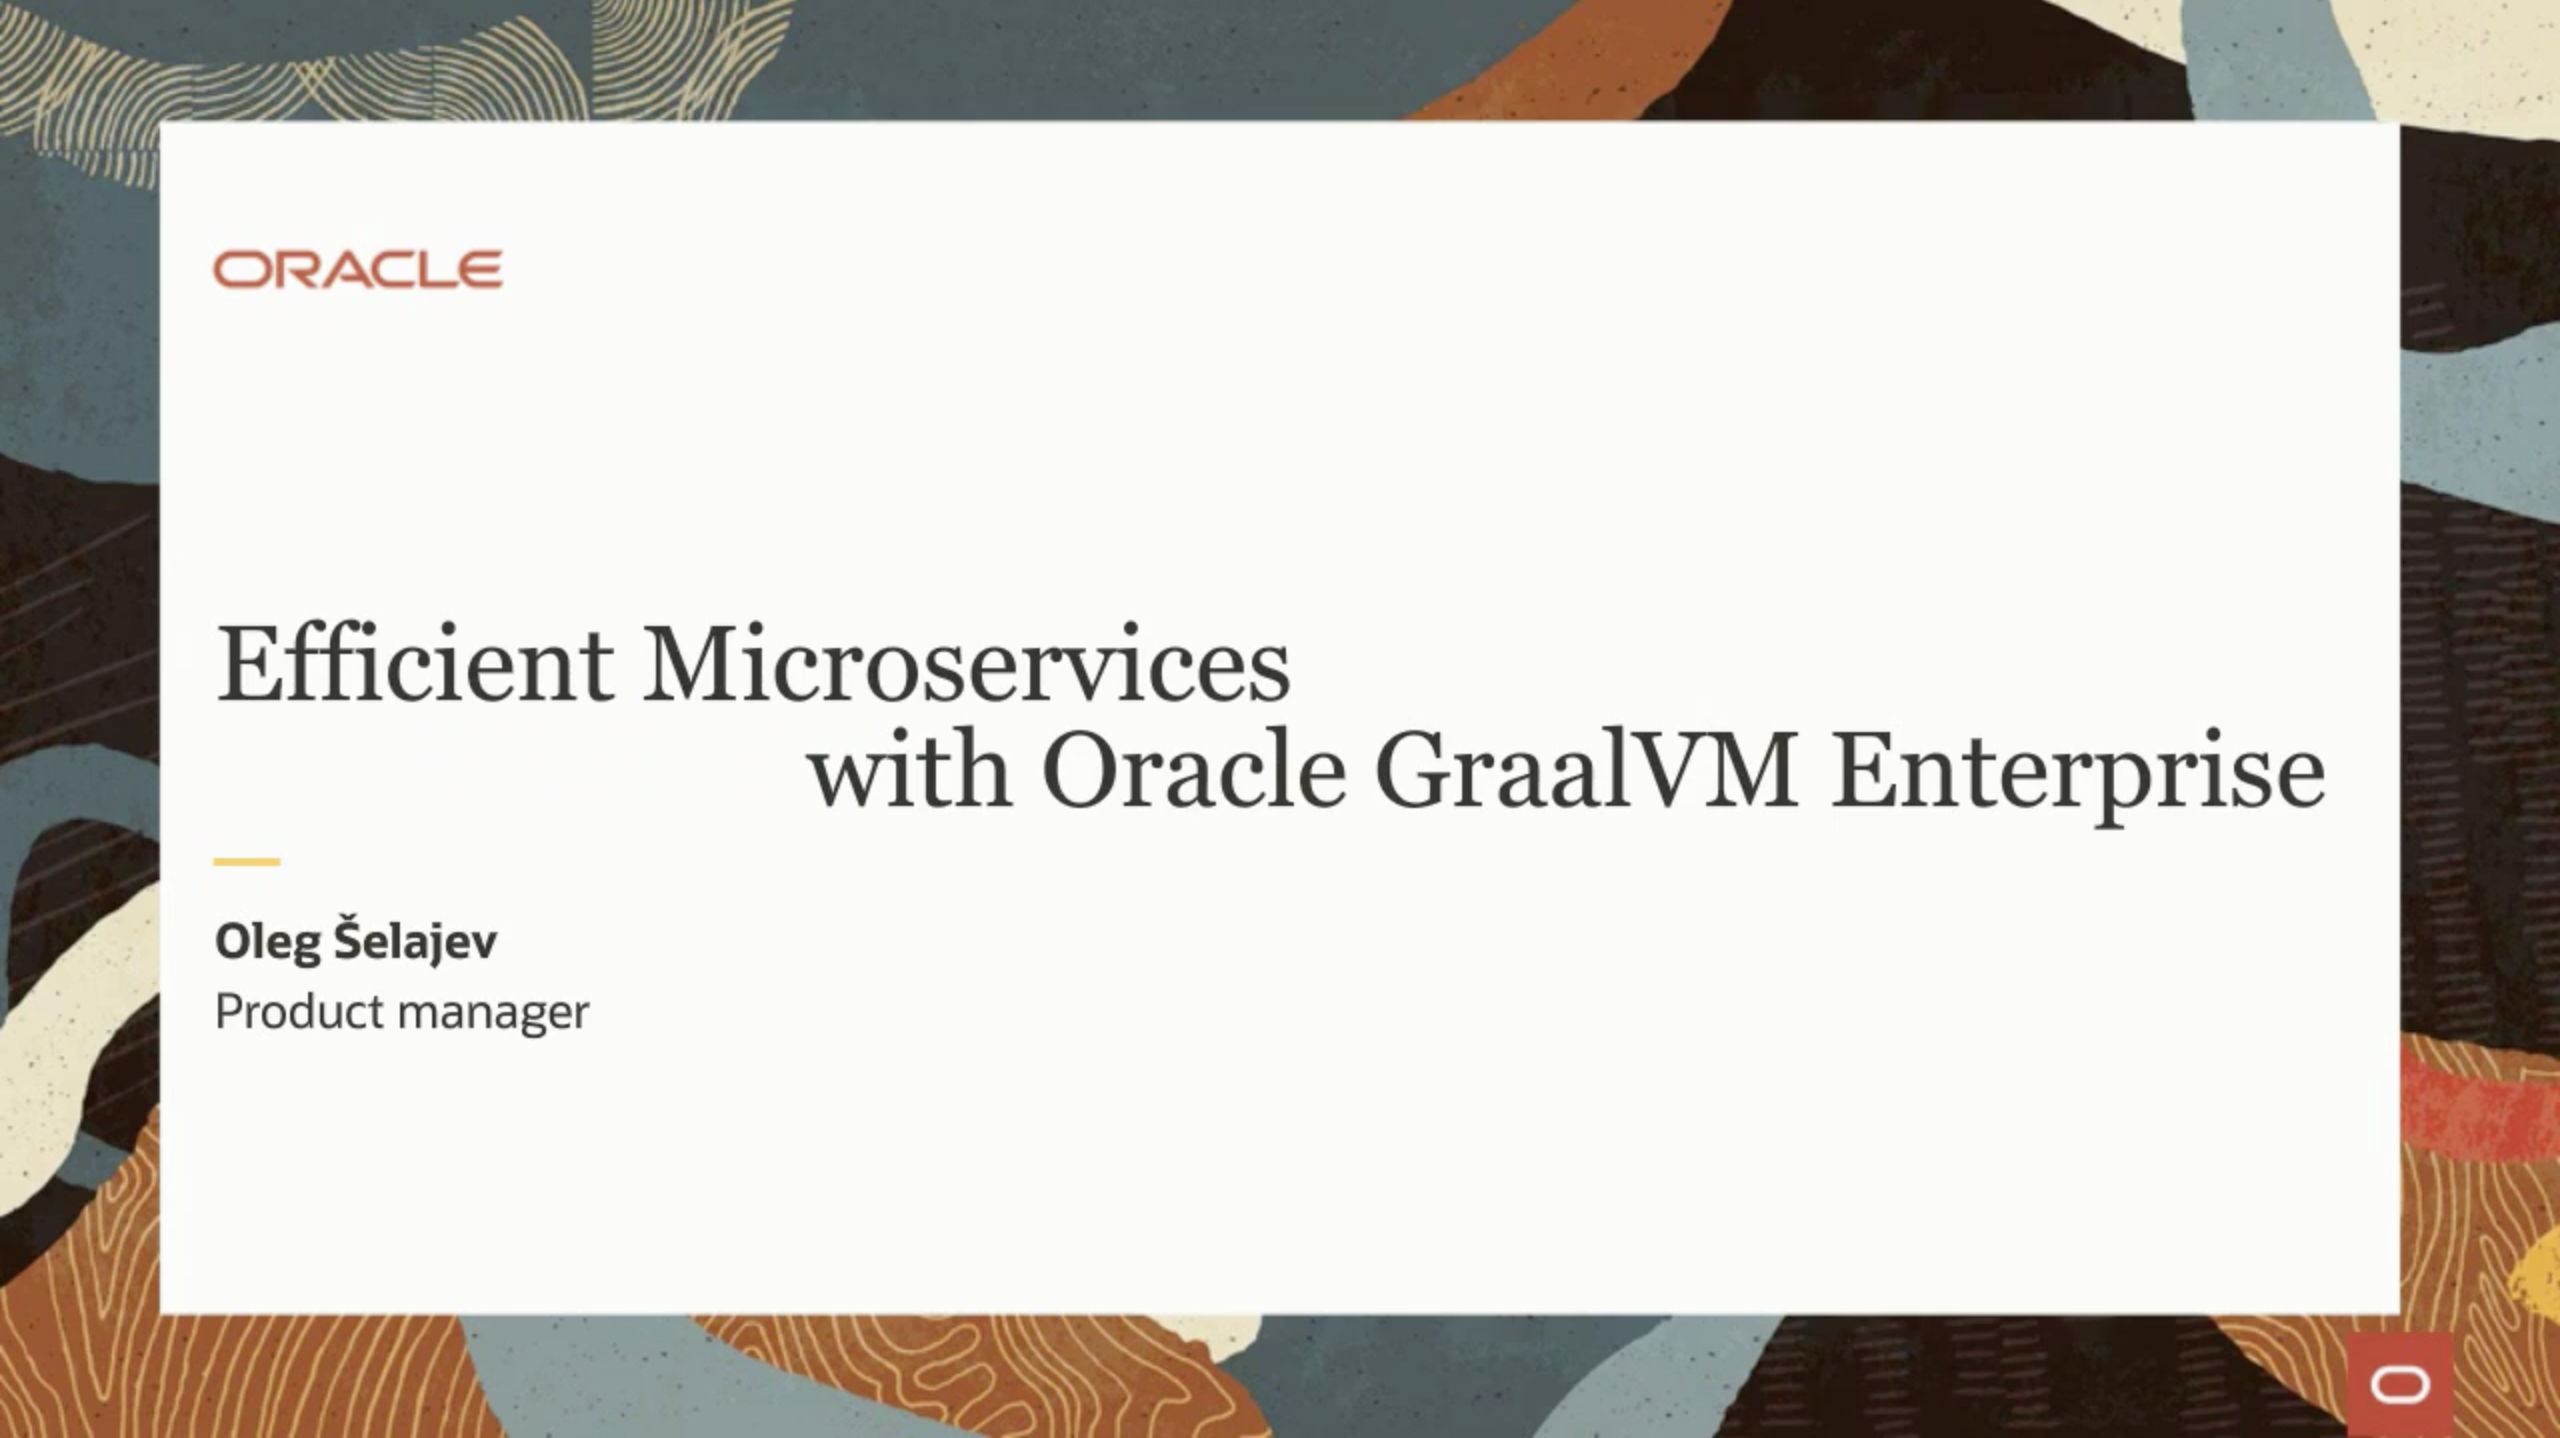 Screenshot 2020 10 10 at 20.47.59 - Efficient Microservices with GraalVM